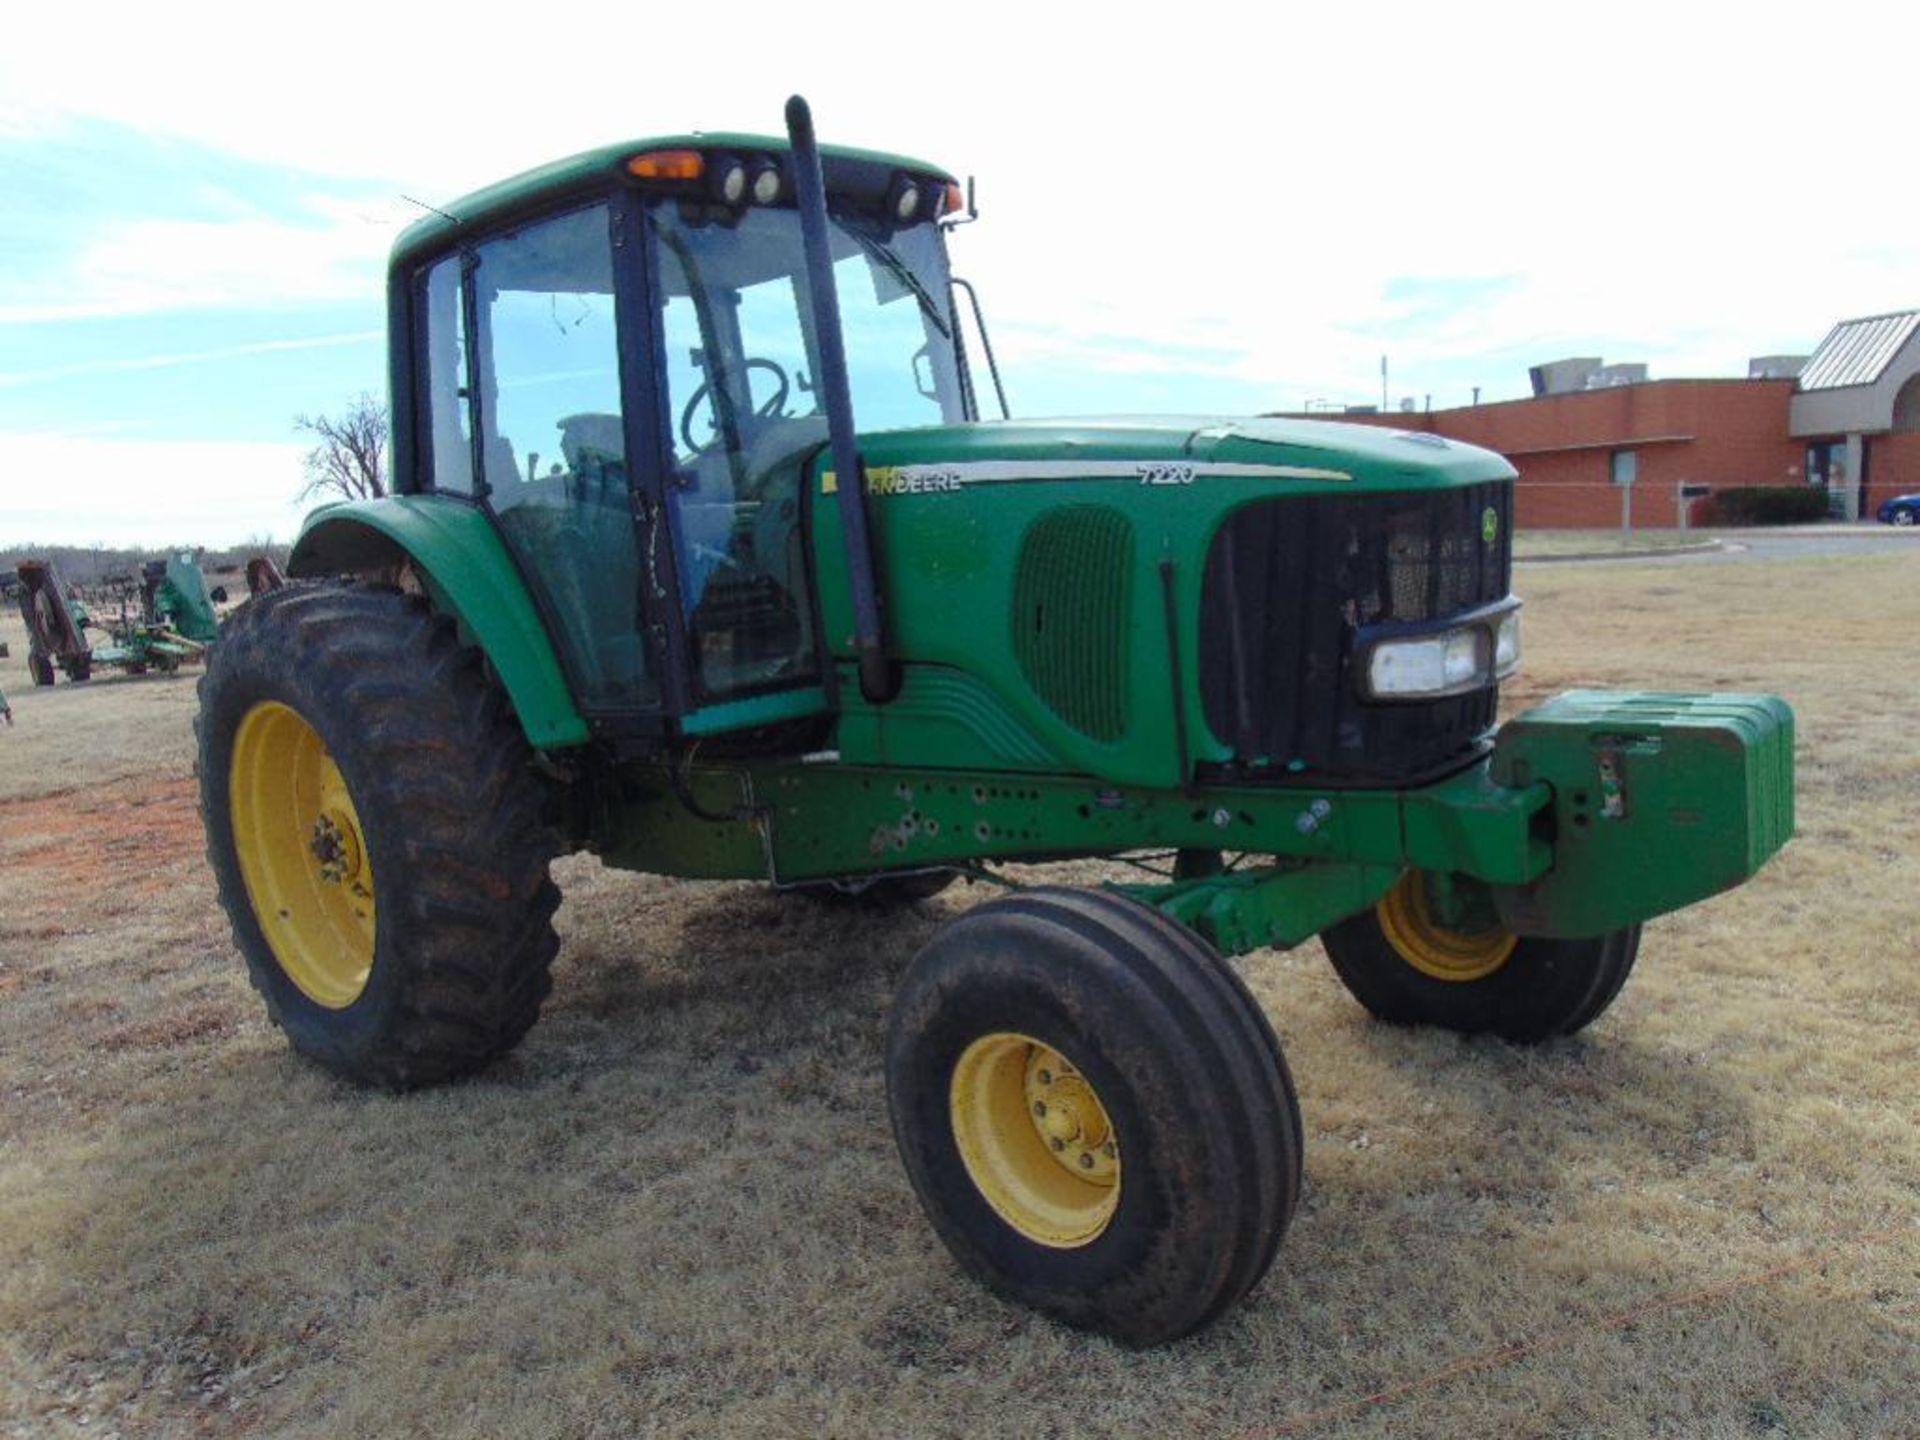 2005 John Deere 7220 Farm Tractor s/n 034661 Cab, a/c, 3pt, pto,hyd outlets, 4732 hrs - Image 3 of 7